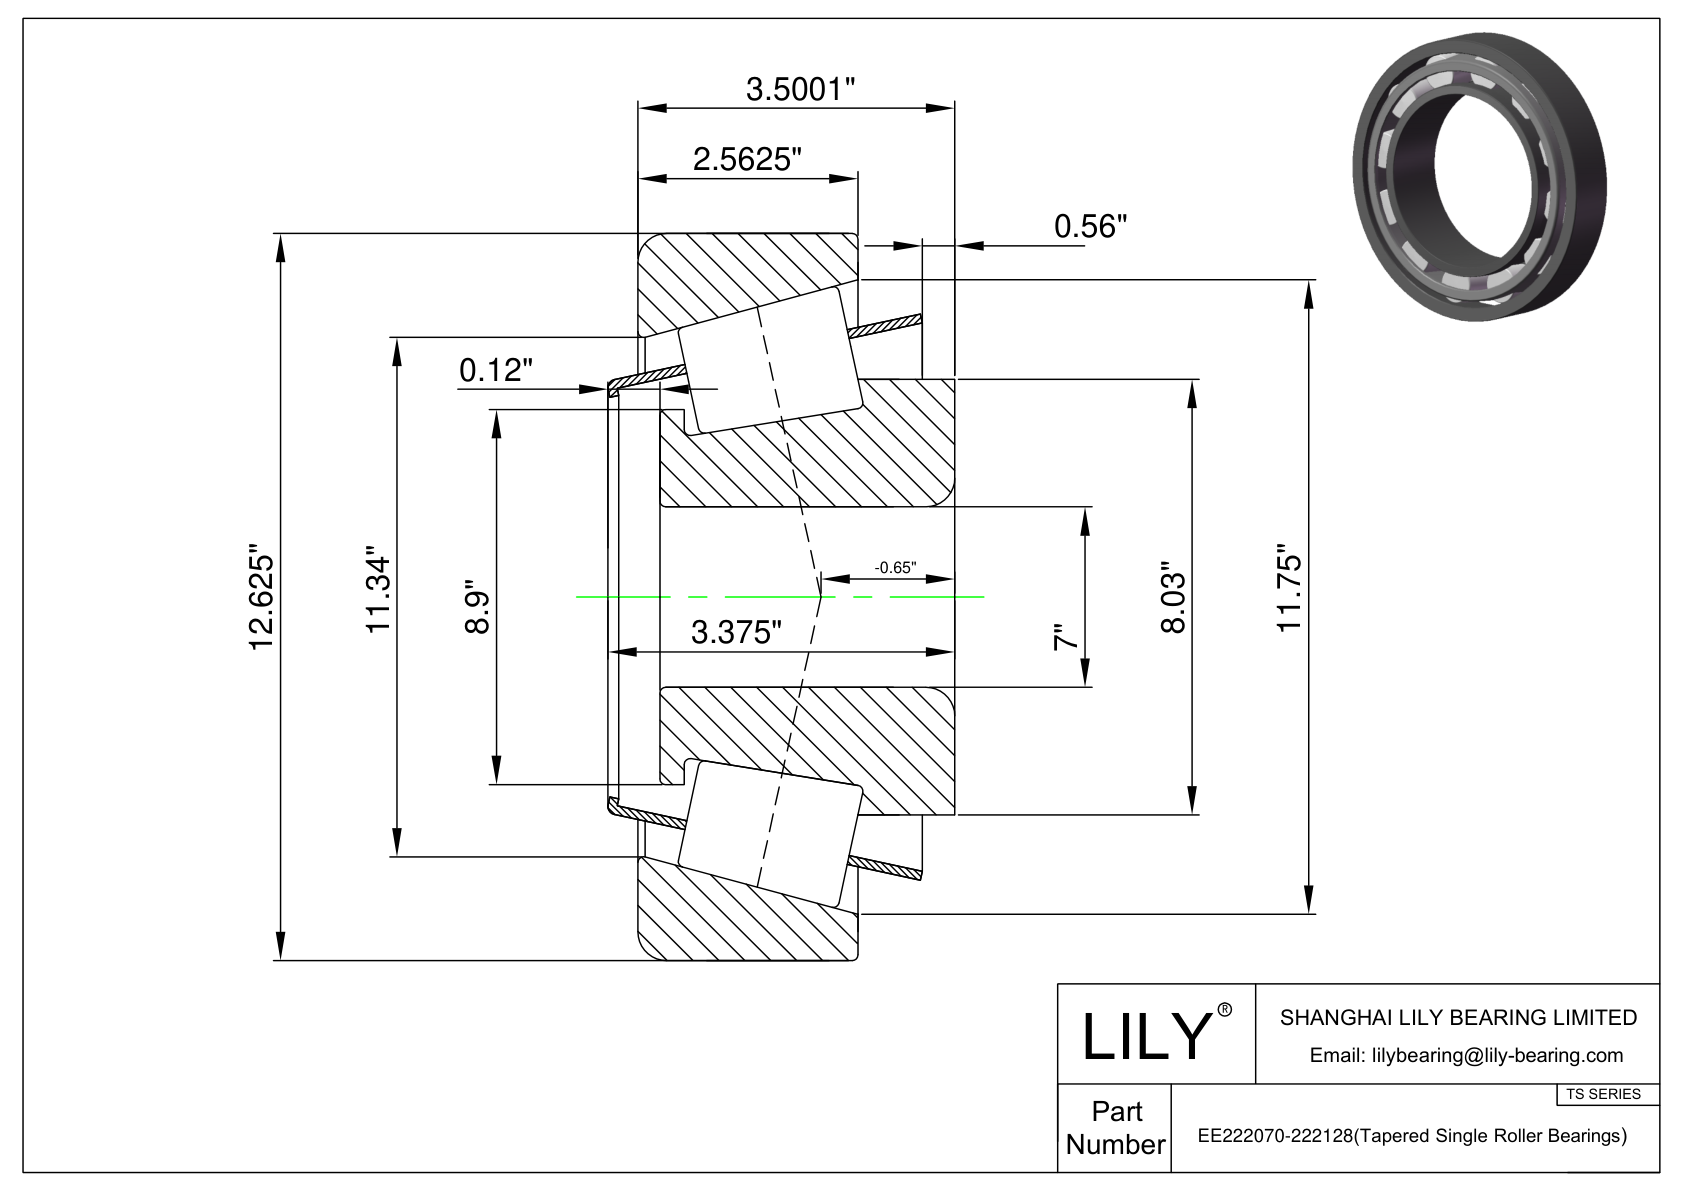 EE222070-222128 TS (Tapered Single Roller Bearings) (Imperial) cad drawing